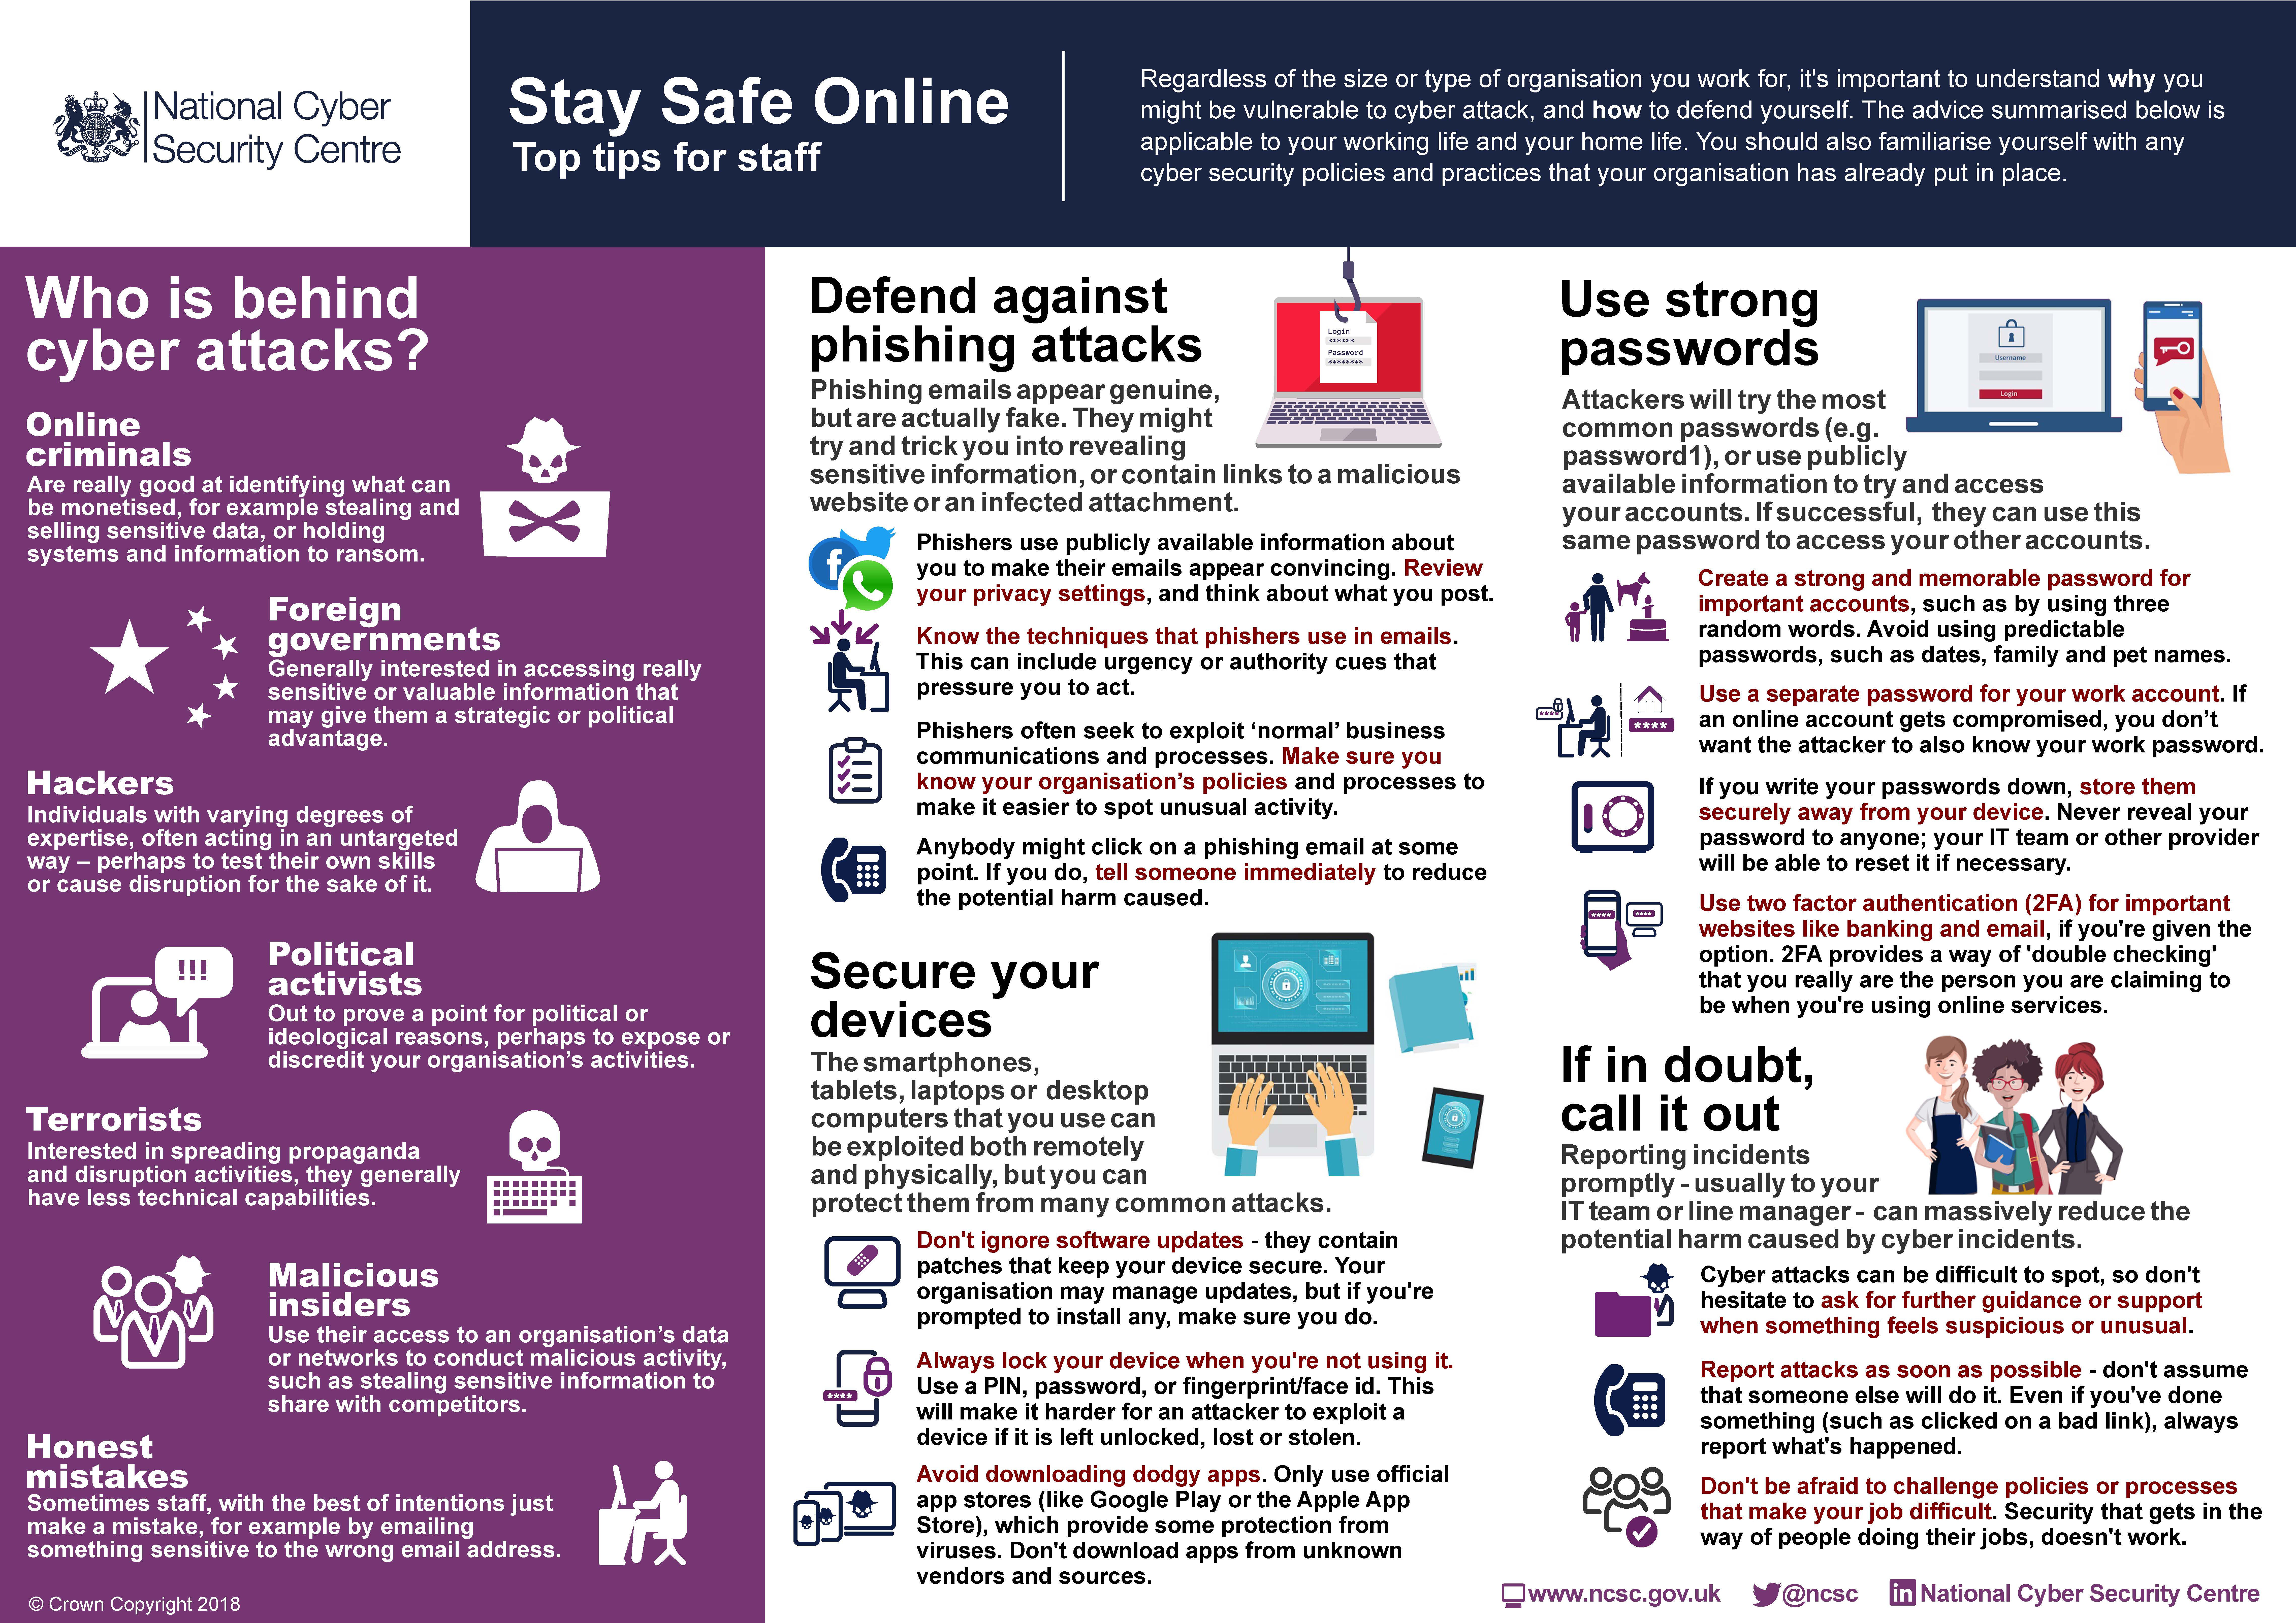 Top tips for staff to stay safe online provided by the National Cyber Security Center